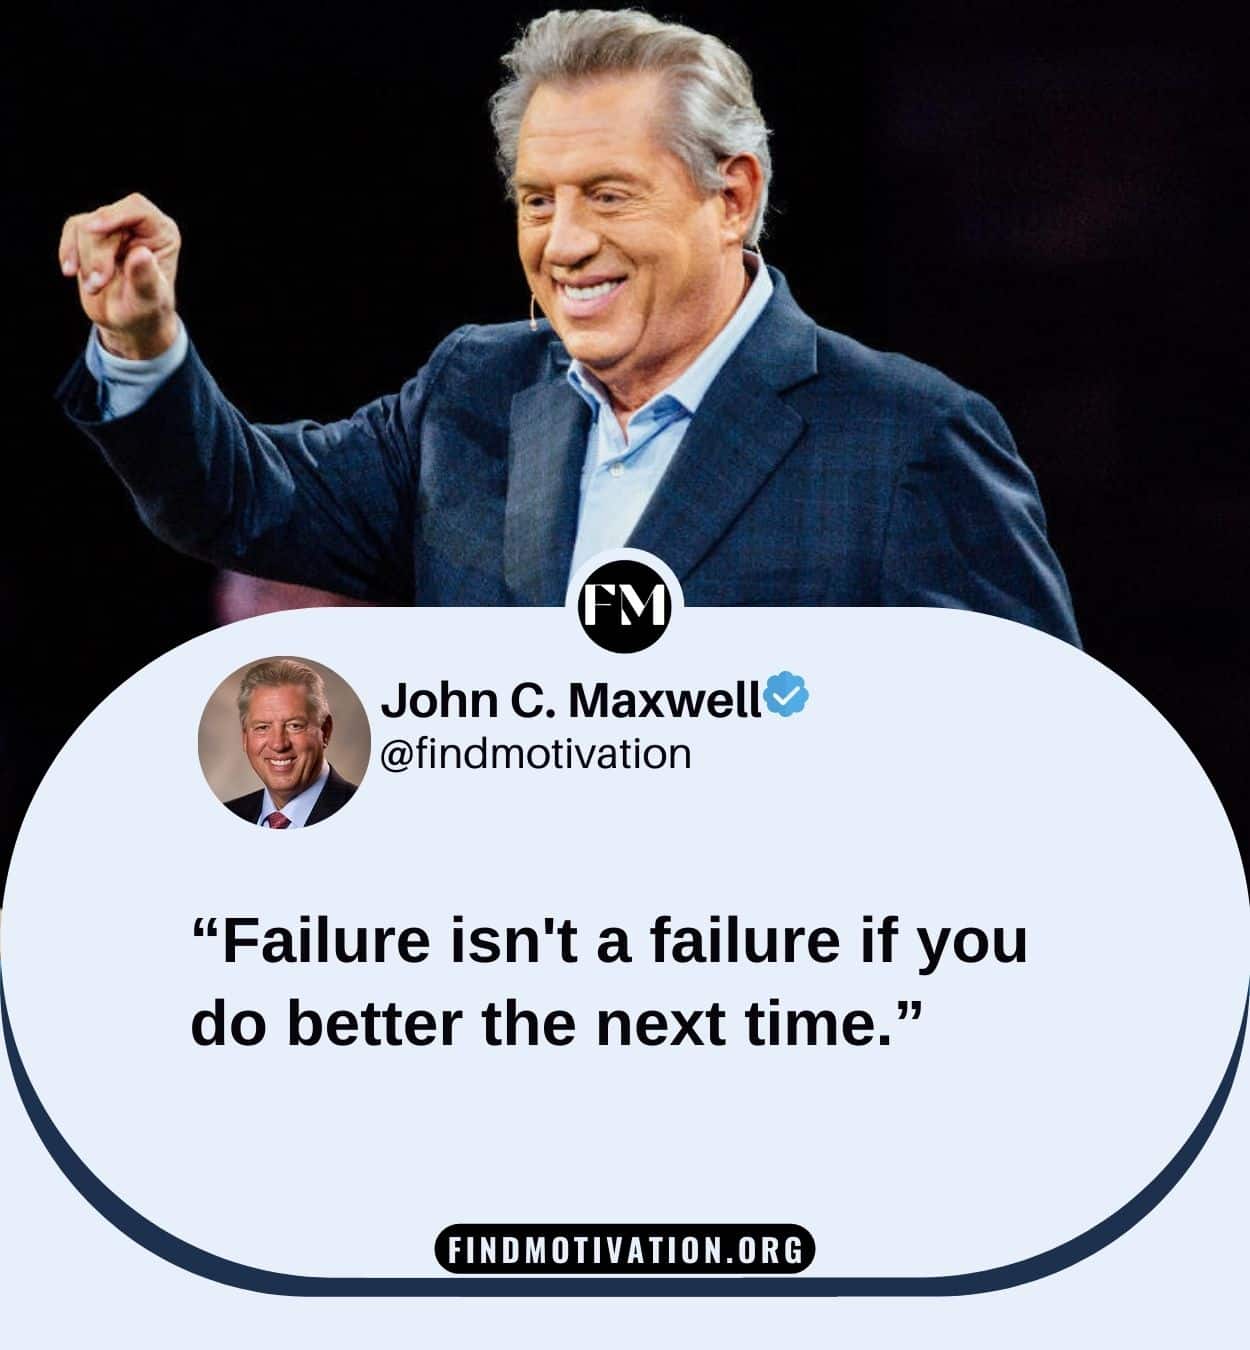 John C Maxwell Success Quotes to achieve your desired goal by making small changes in your routine